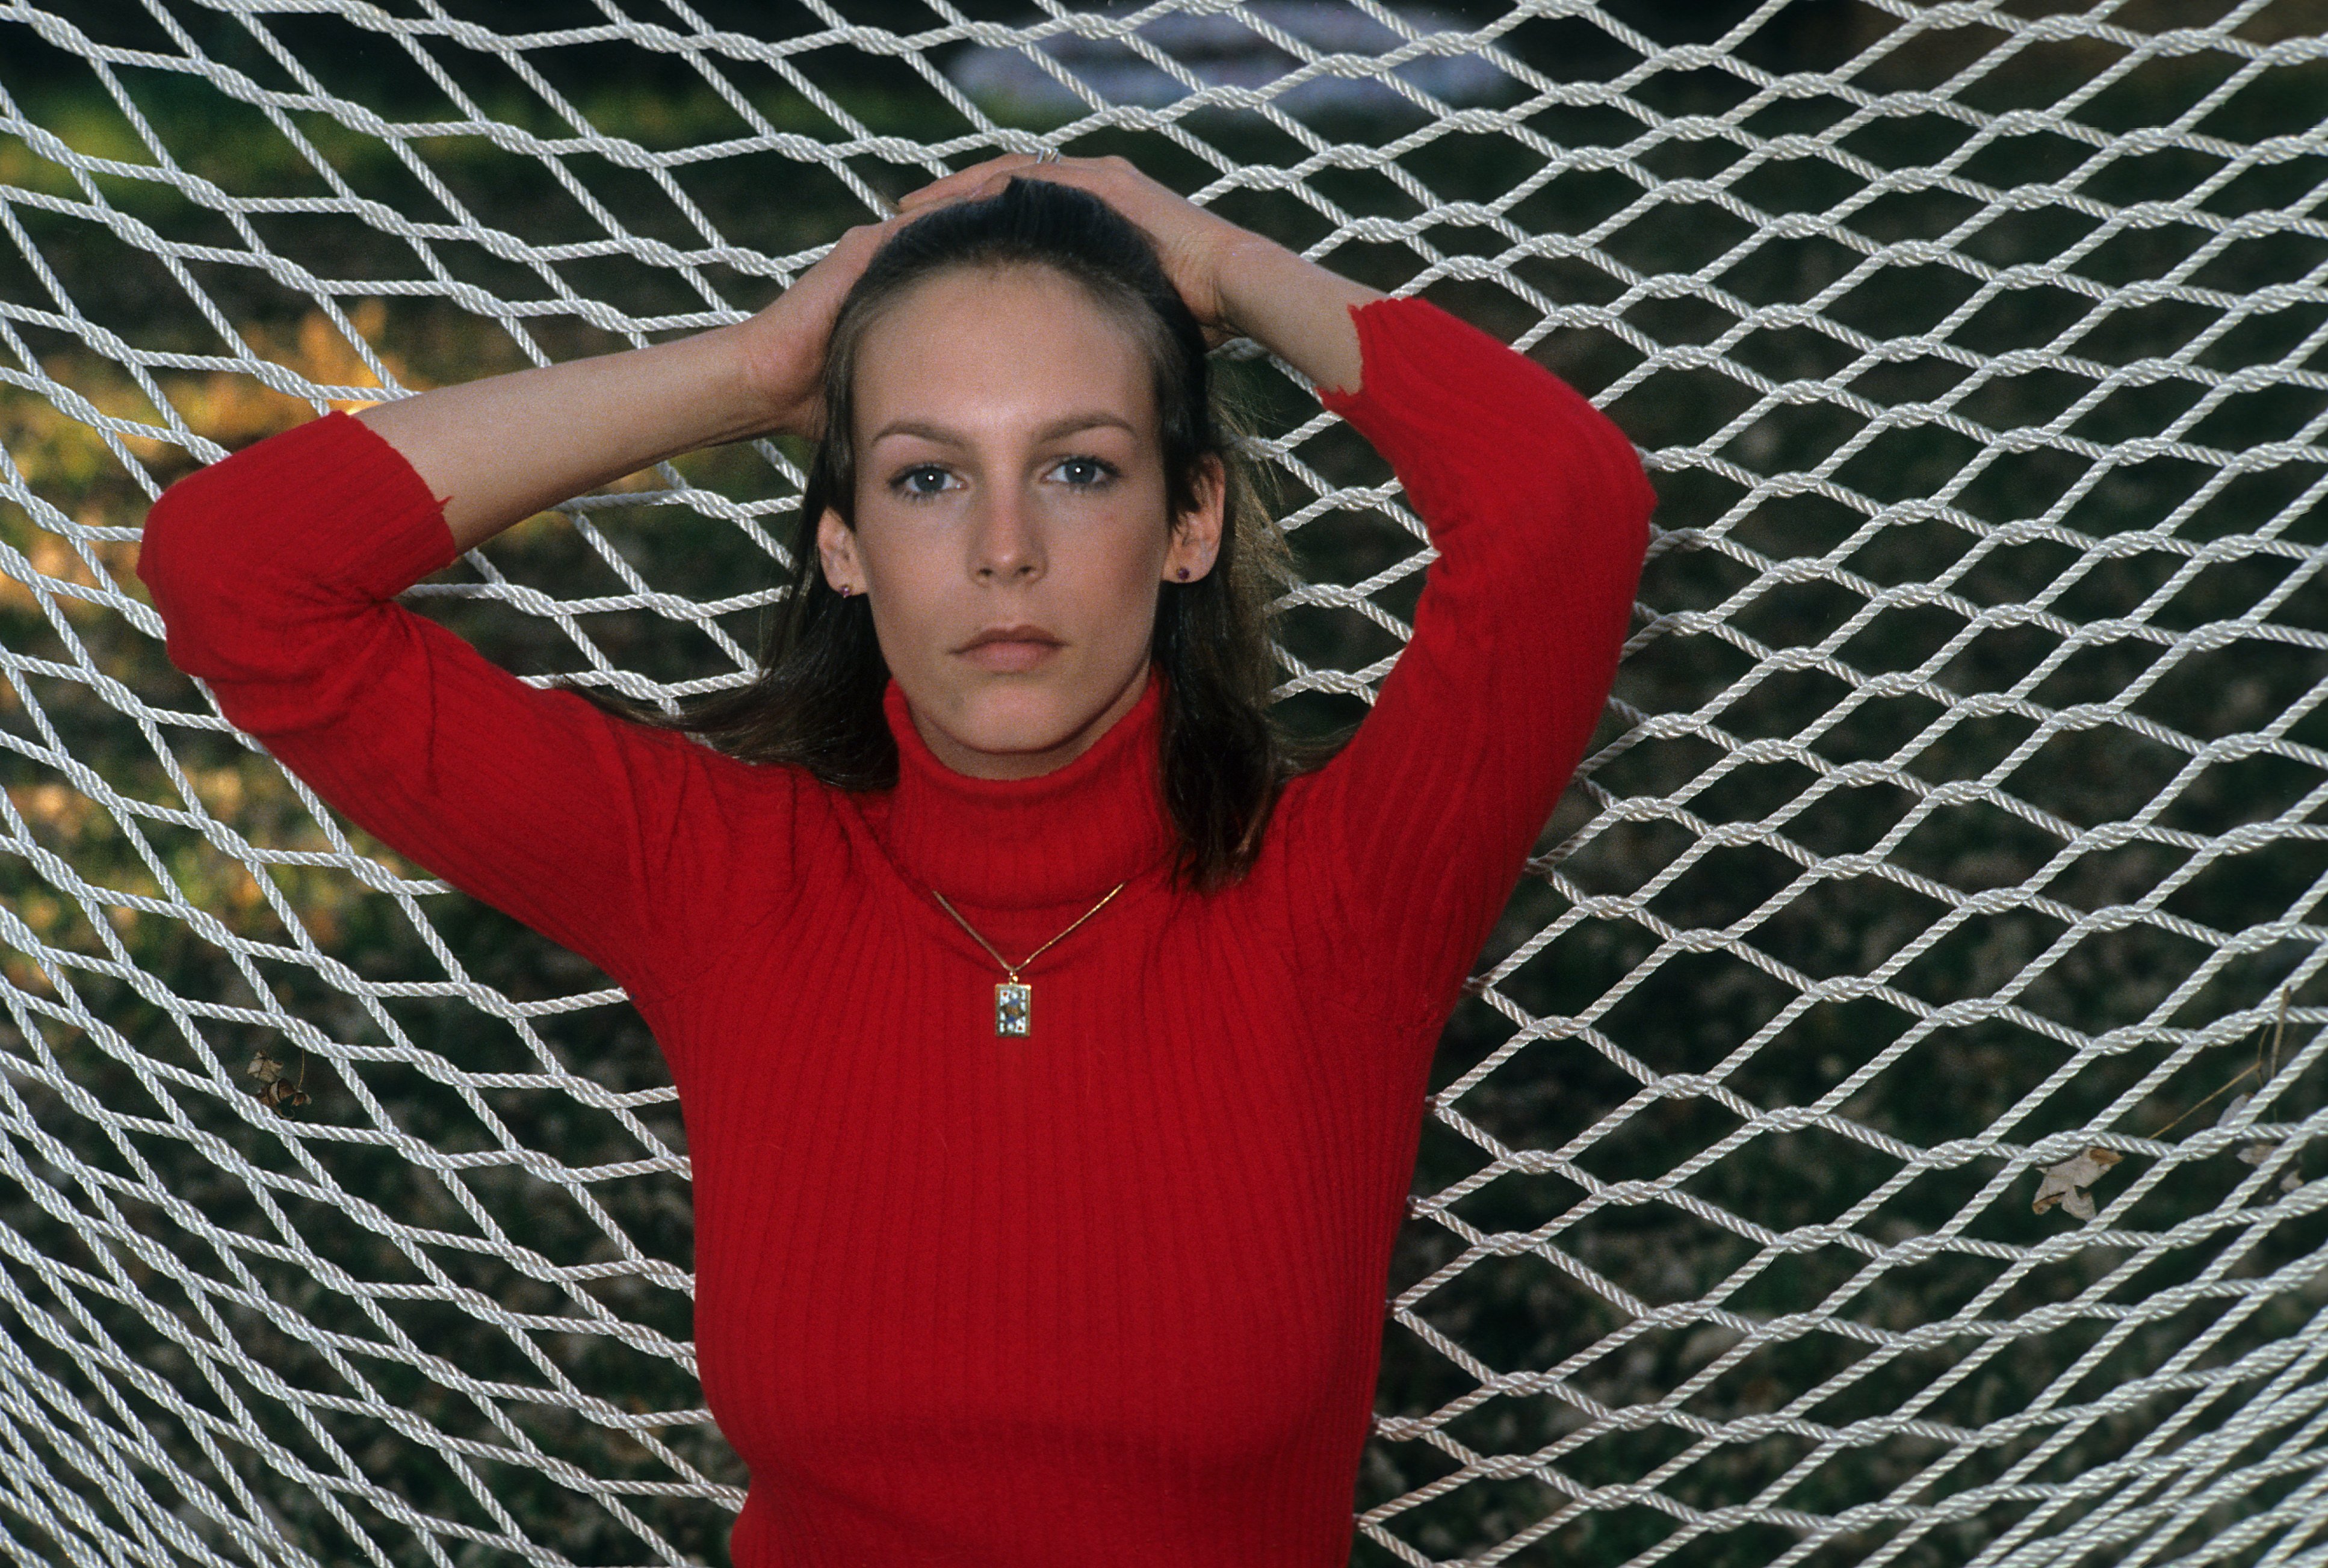 Jamie Lee Curtis poses for a portrait in December 1978 in Los Angeles, California. | Source: Getty Images